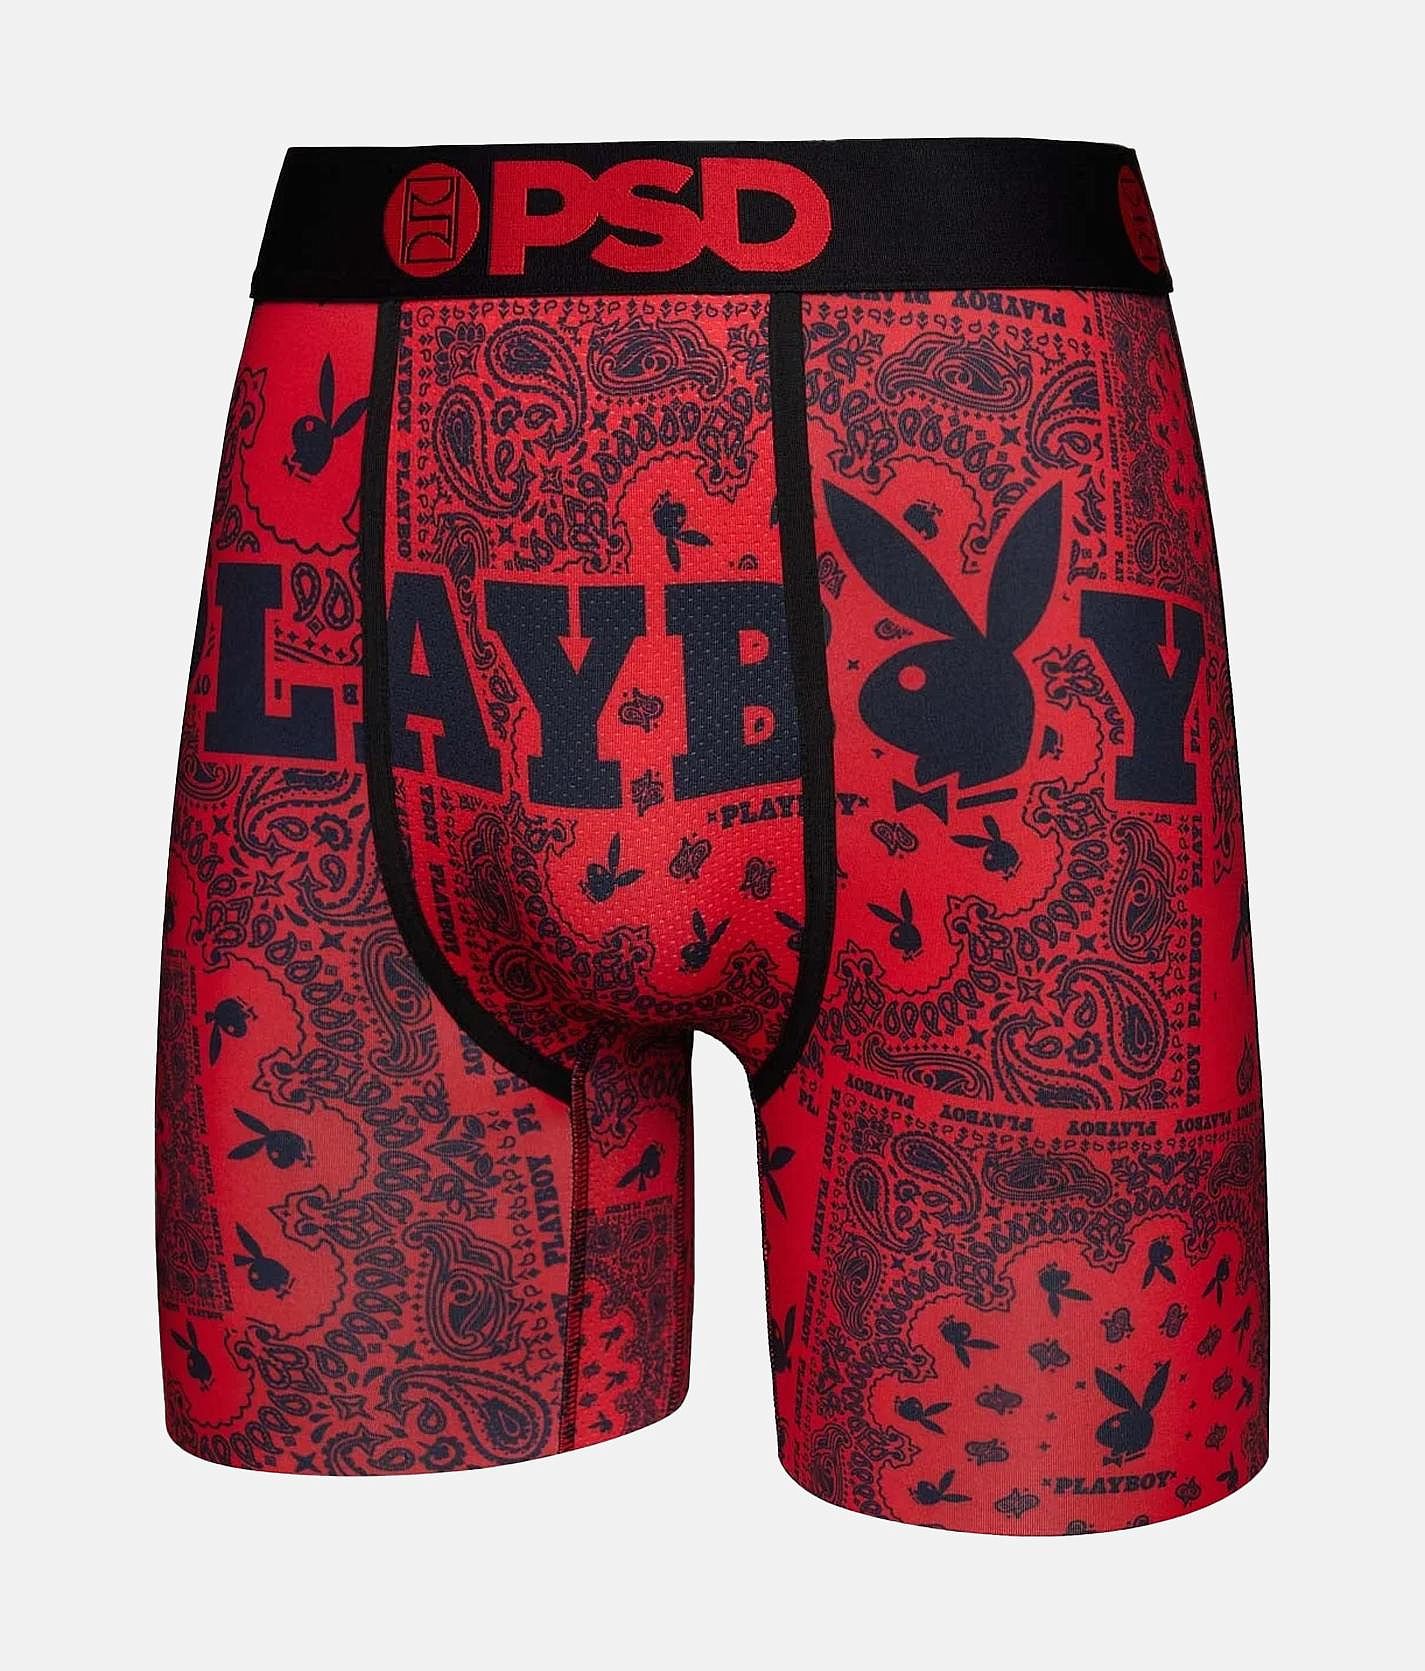 PSD Playboy Stretch Boxer Briefs - Men's Boxers in Red